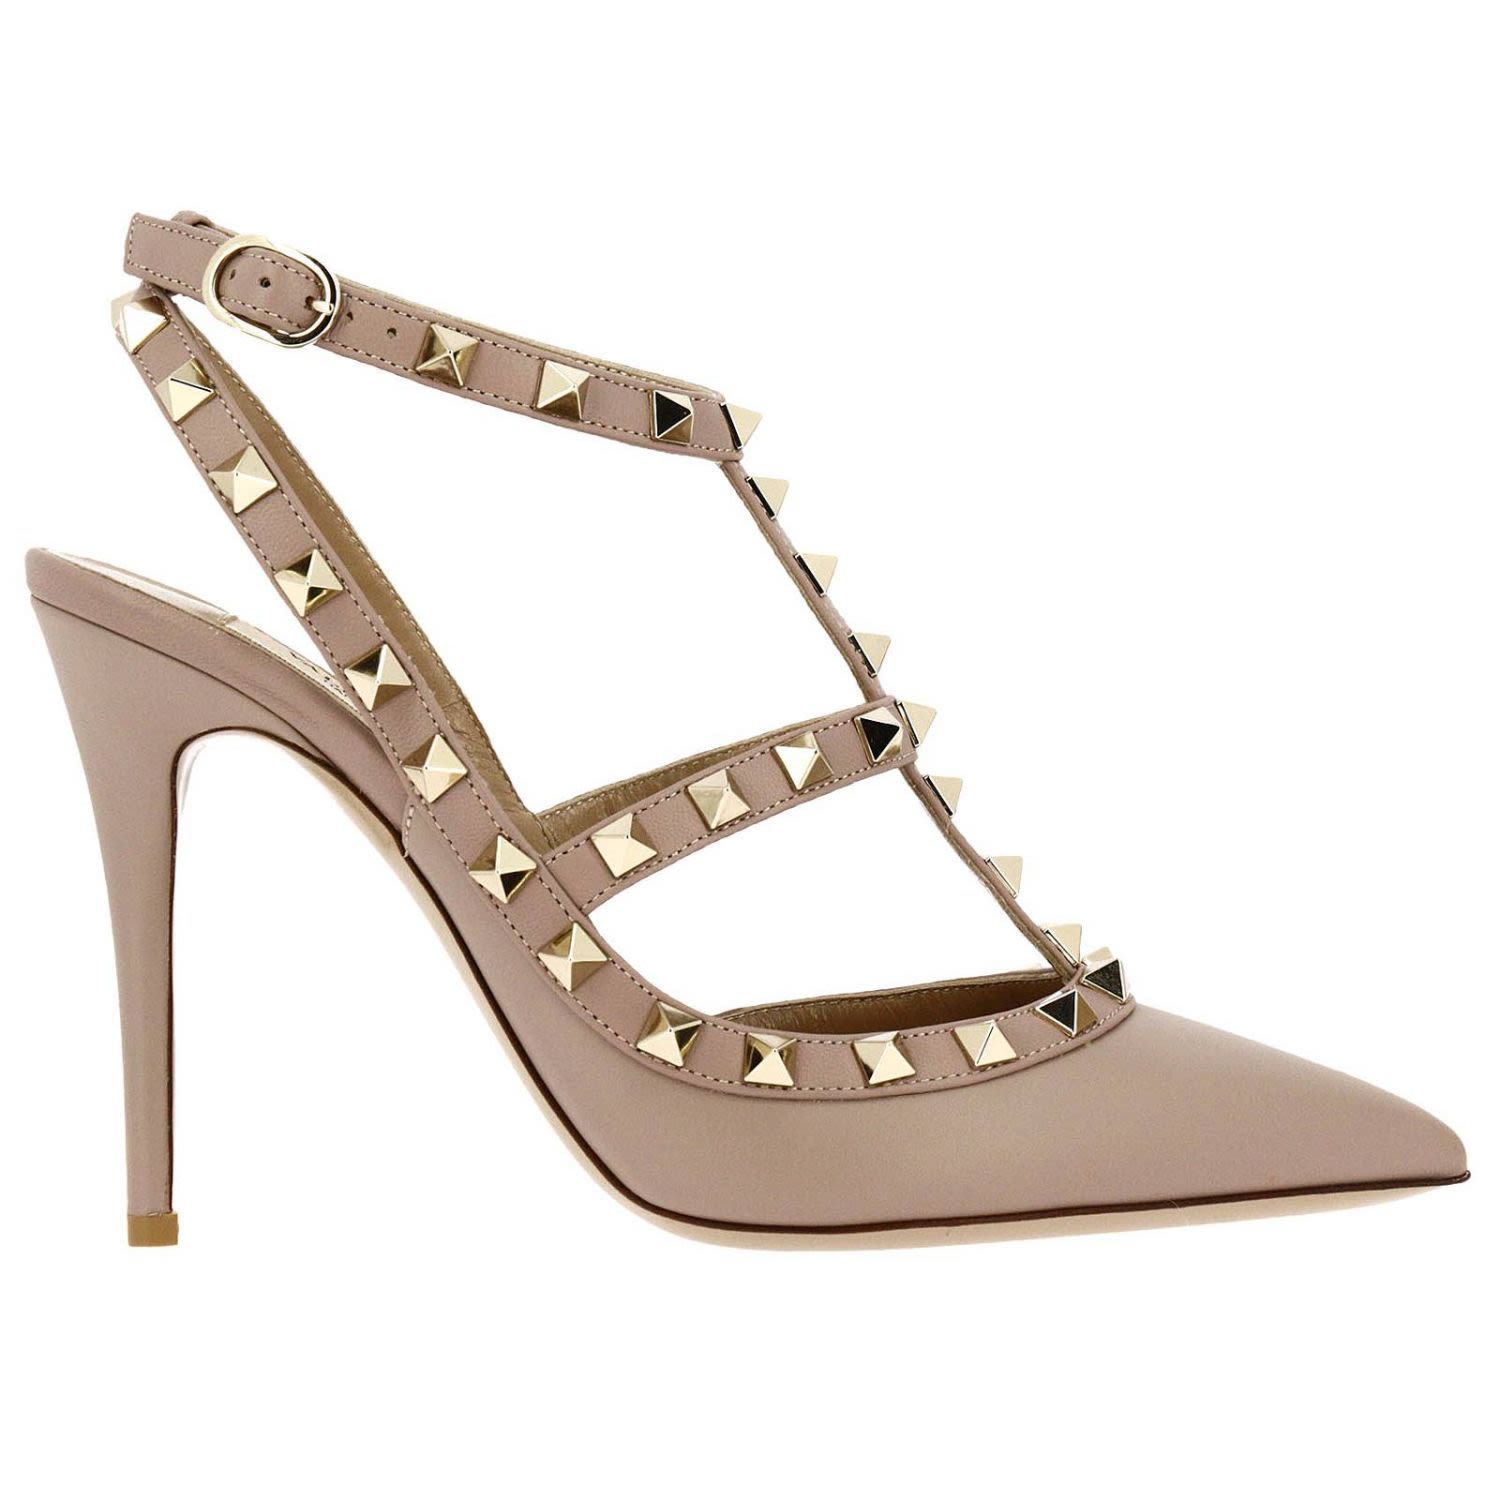 Pumps Valentino Rockstud Pumps Ankle Strap In Real Leather With Bicolor Pattern And Micro Studs | Italist.com US